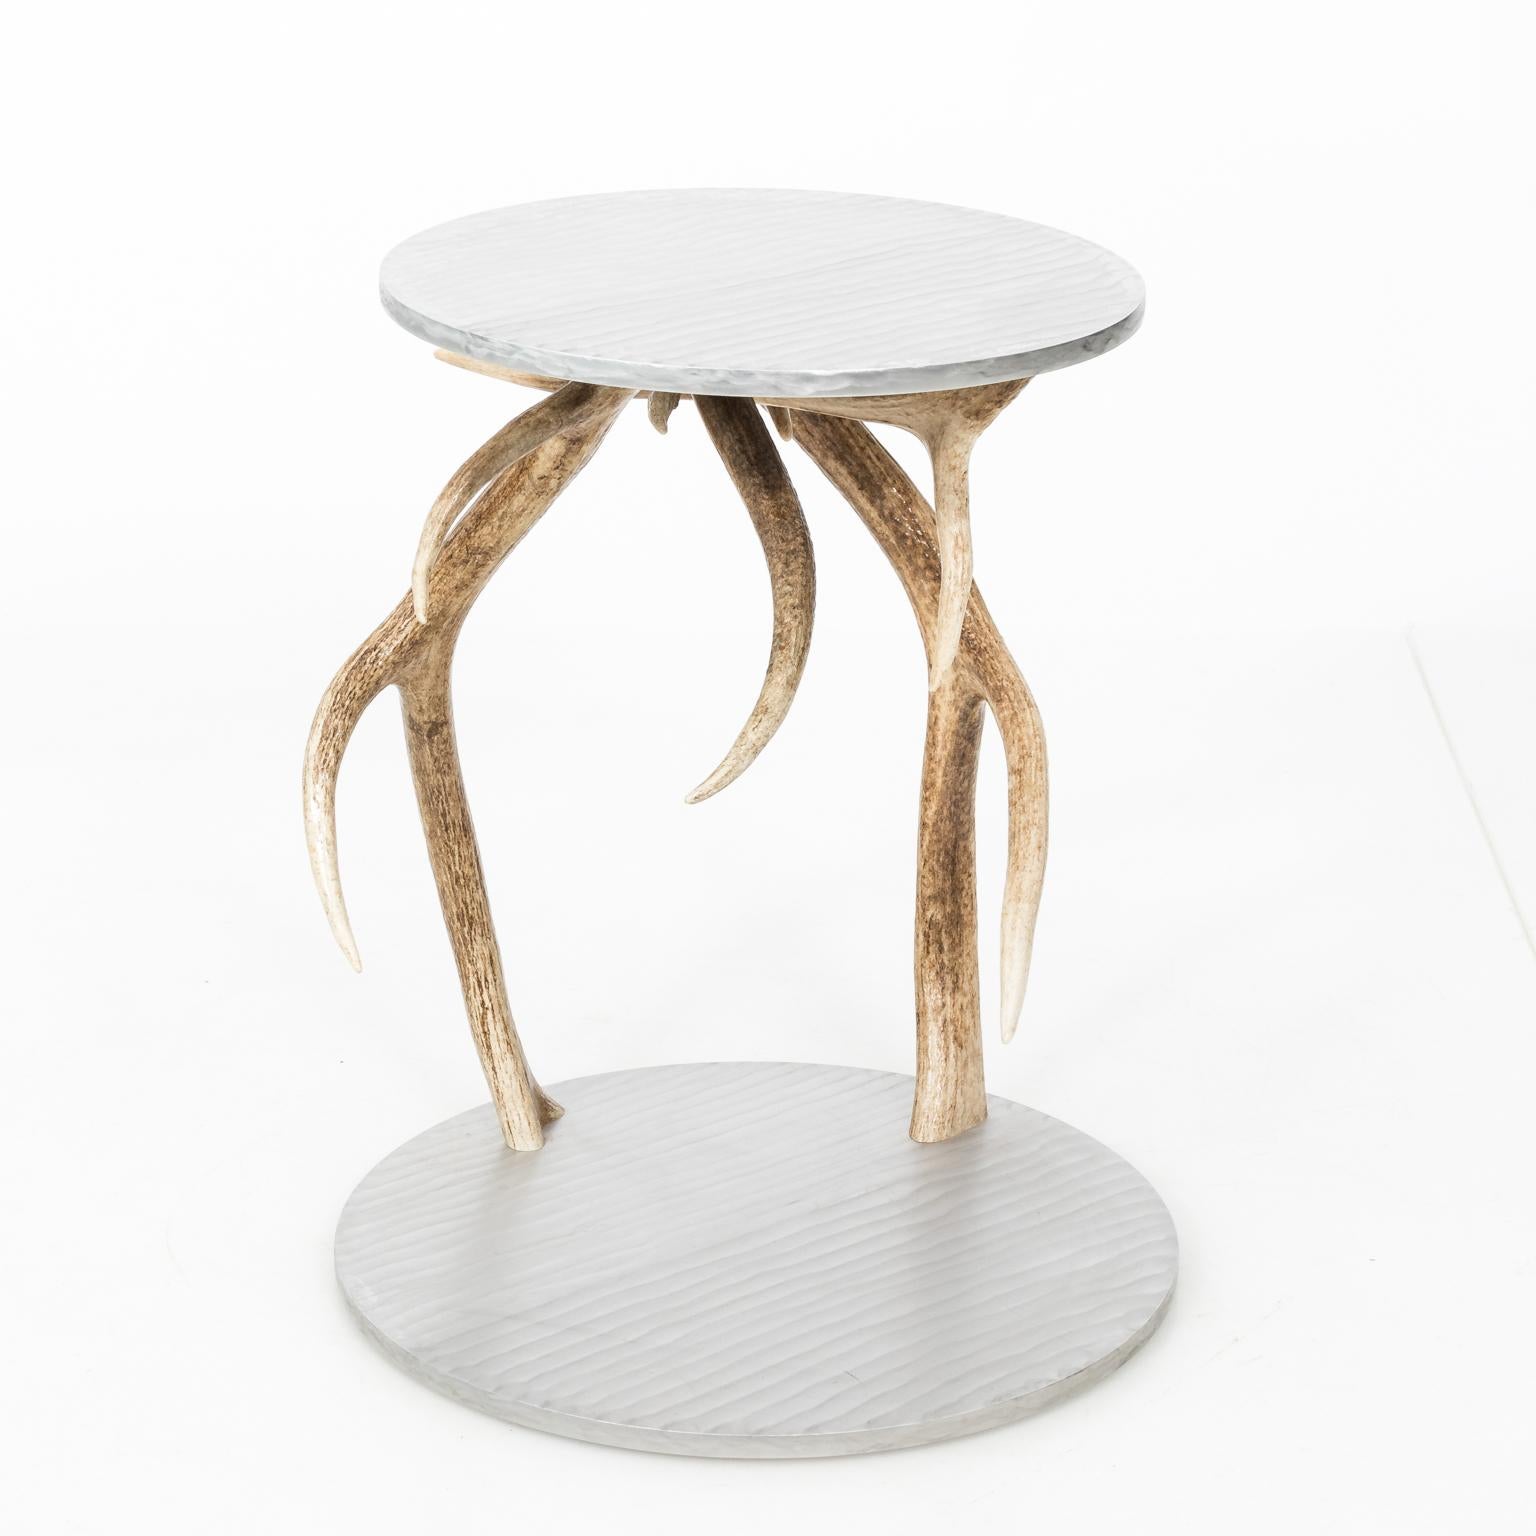 Custom made side table signed by artist Daniel S.Macphail with aluminium tabletop and base decorated with antlers, circa 2010.